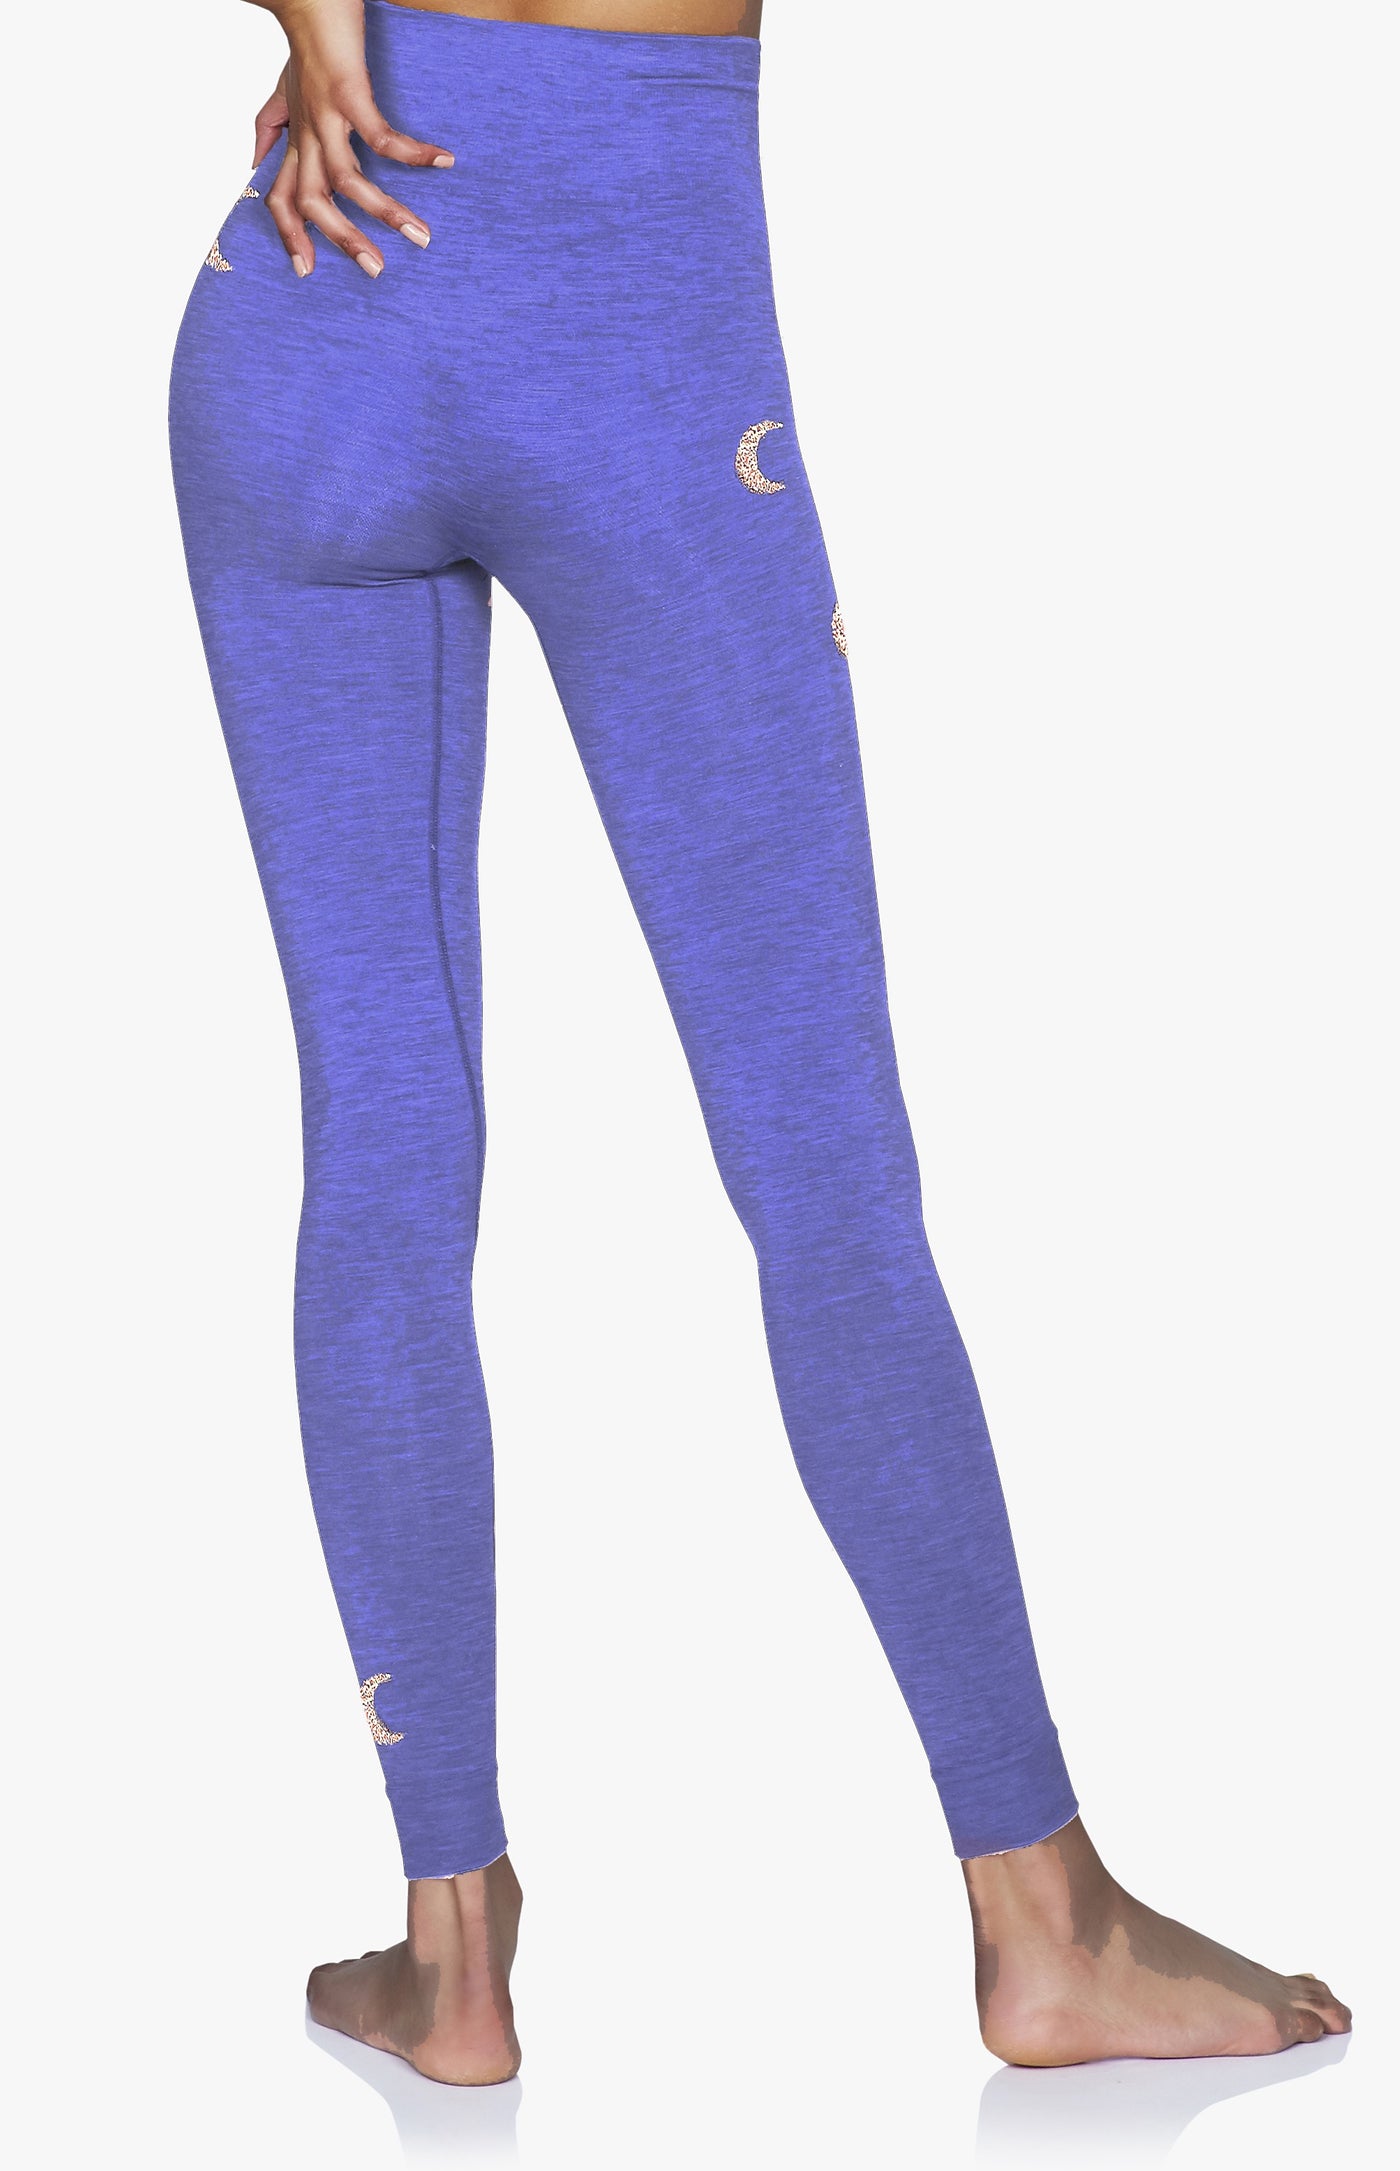 Solstice Seamless Legging with silver crescent moons in Blue Iris Purple on model